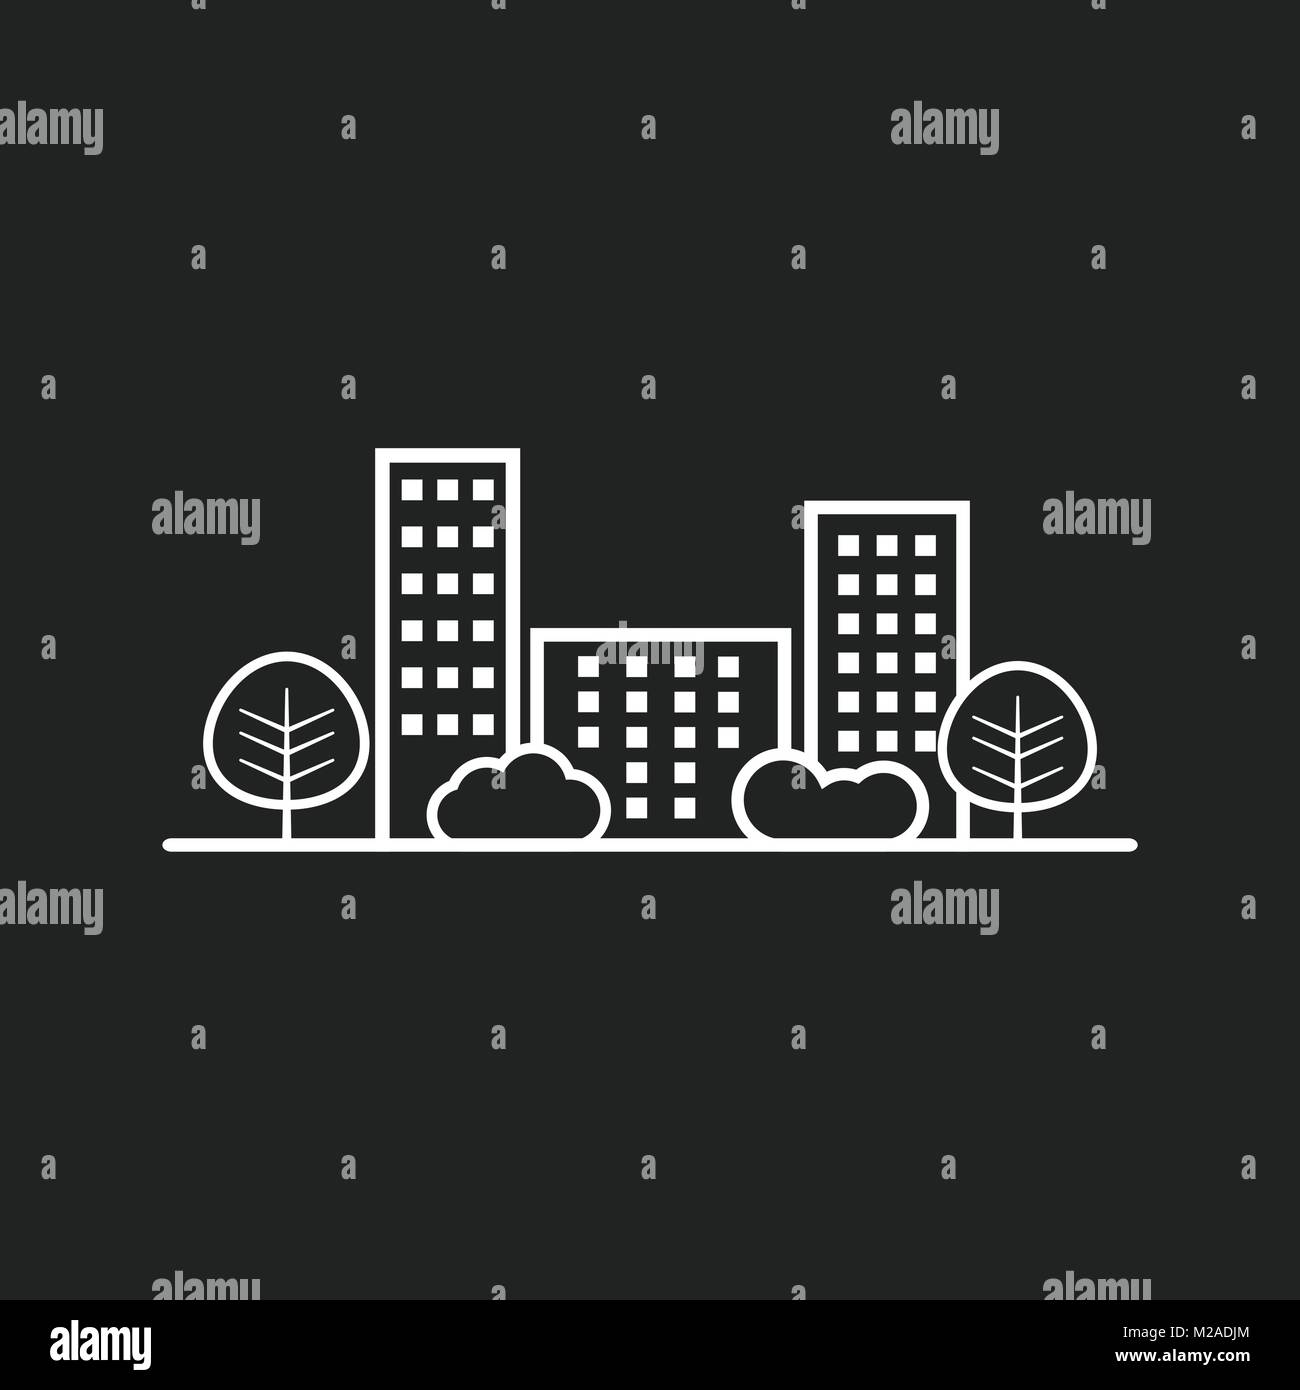 Vector city illustration in flat style. Building, tree and shrub on ...